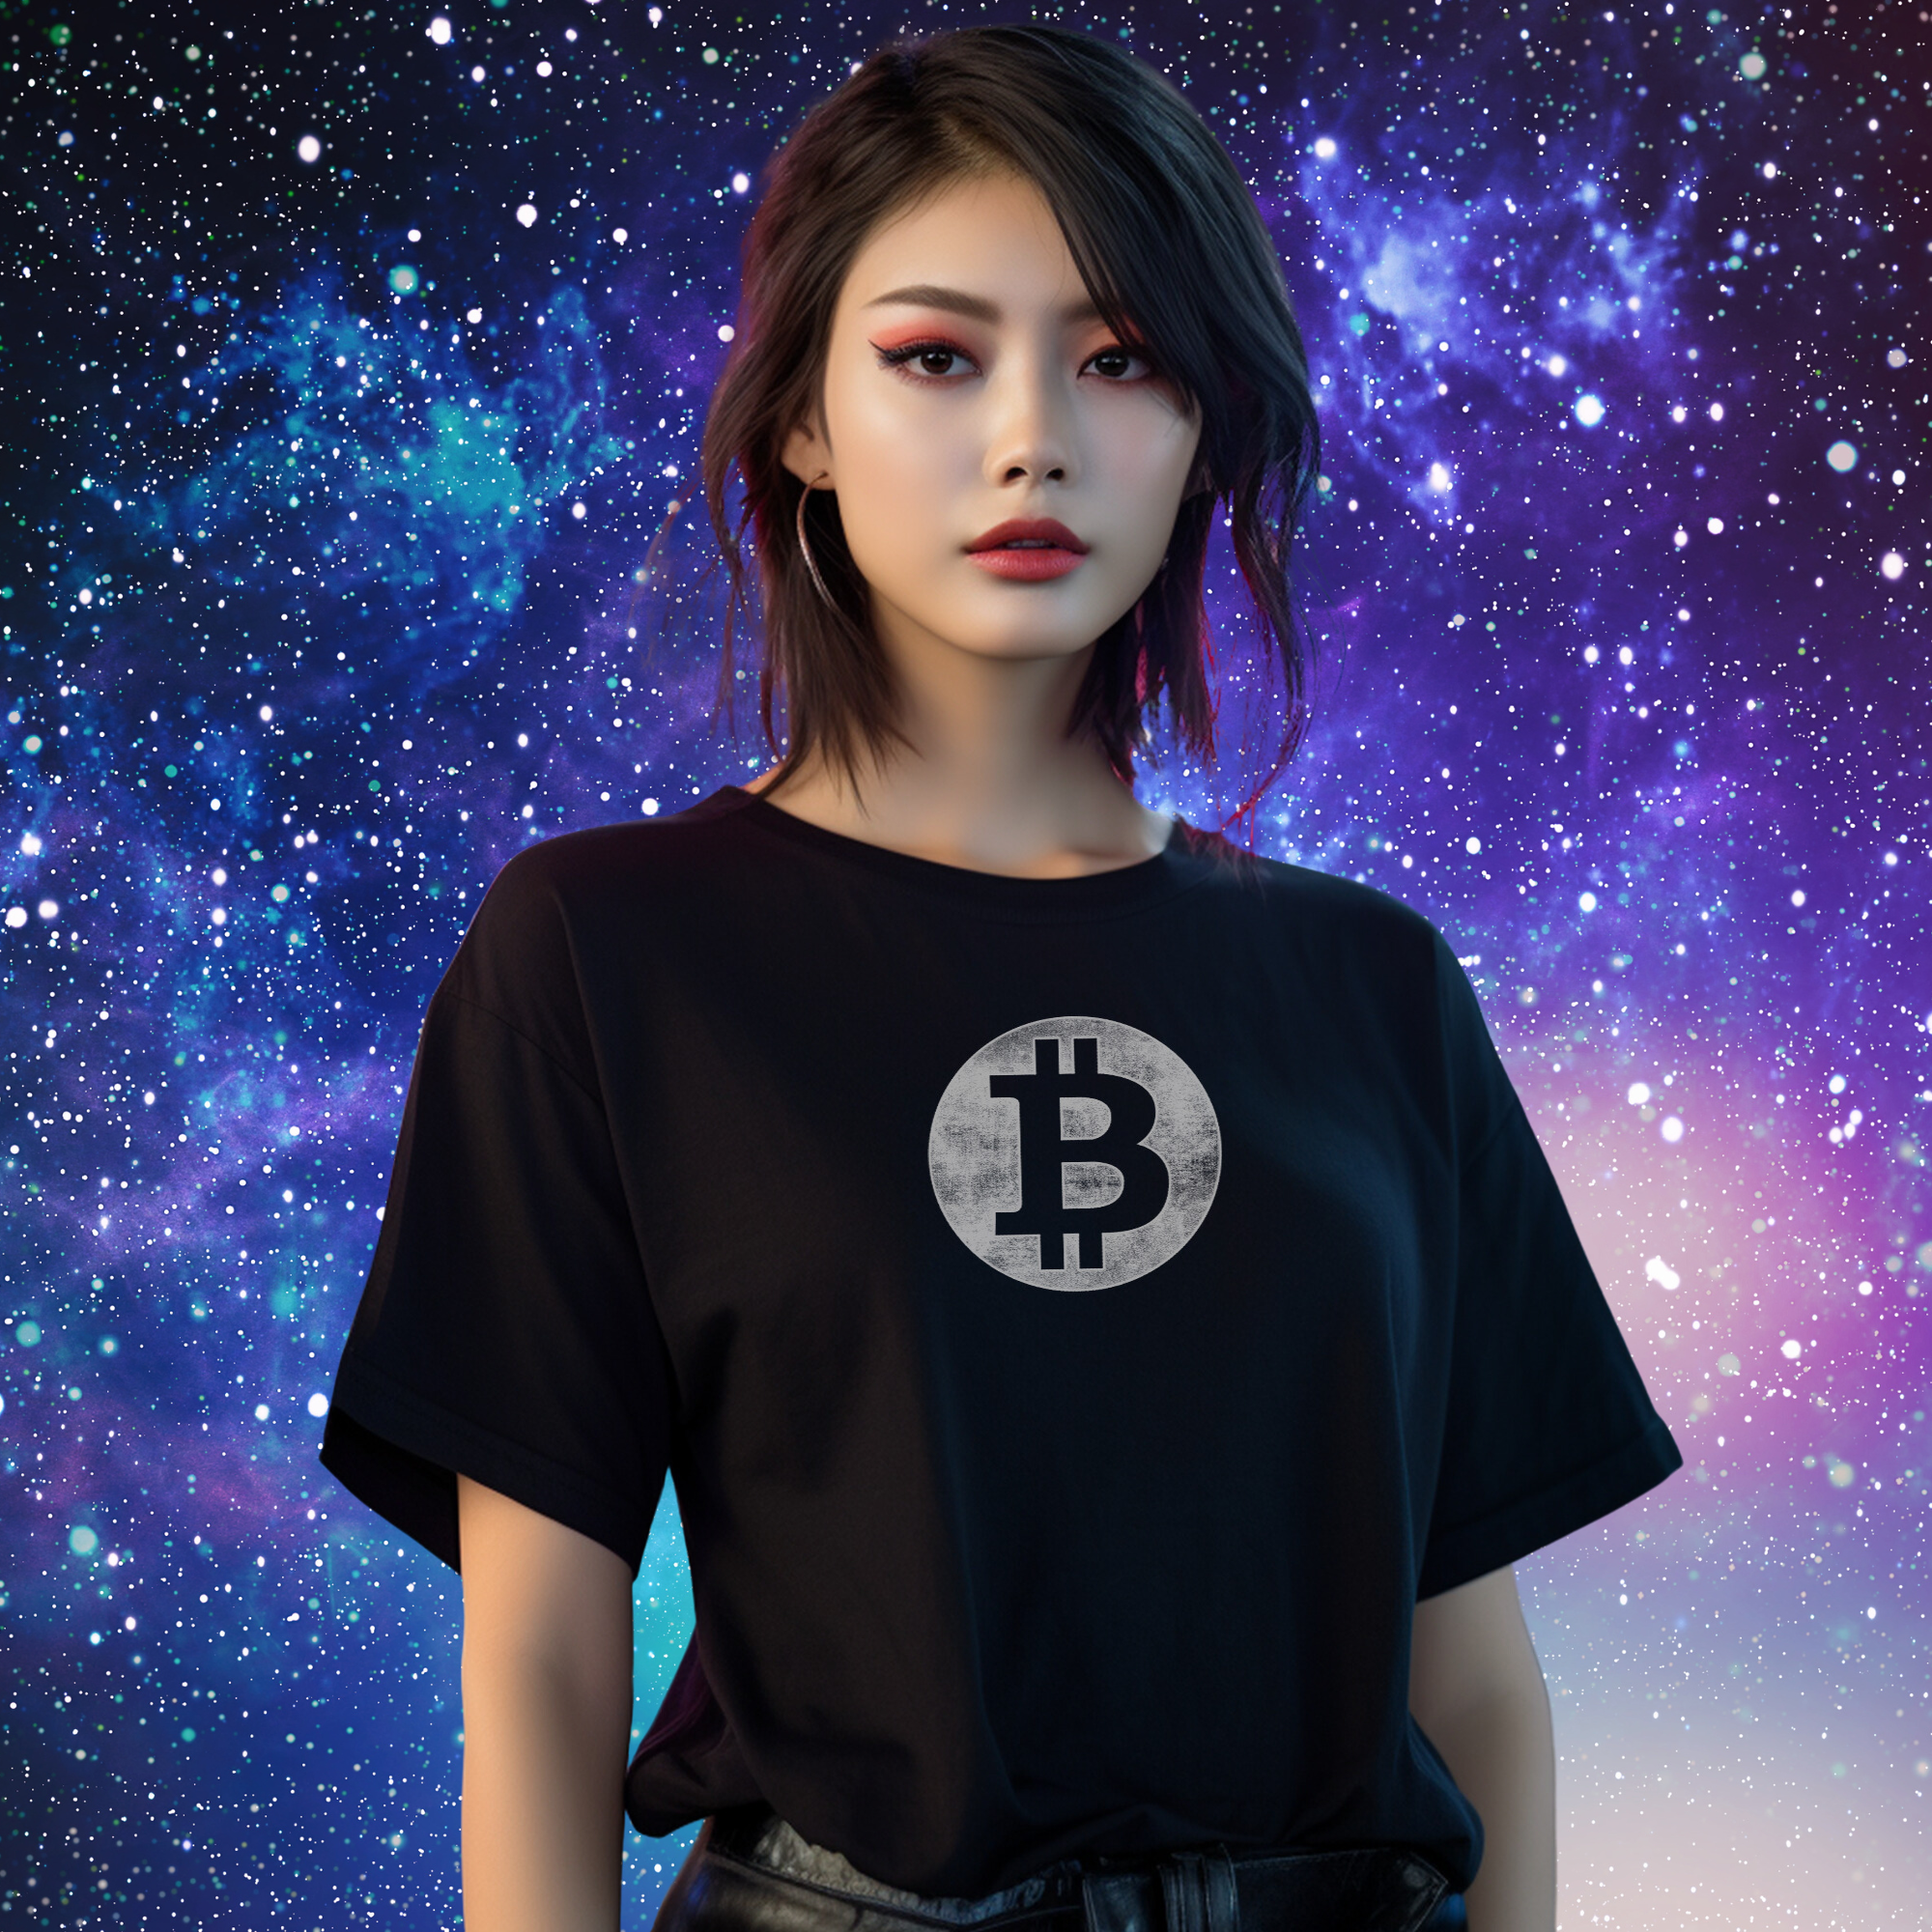 Bitcoin Clothing - Bitcoin Moon Tee. Female model. Front view. Available at NEONCRYPTO STORE.